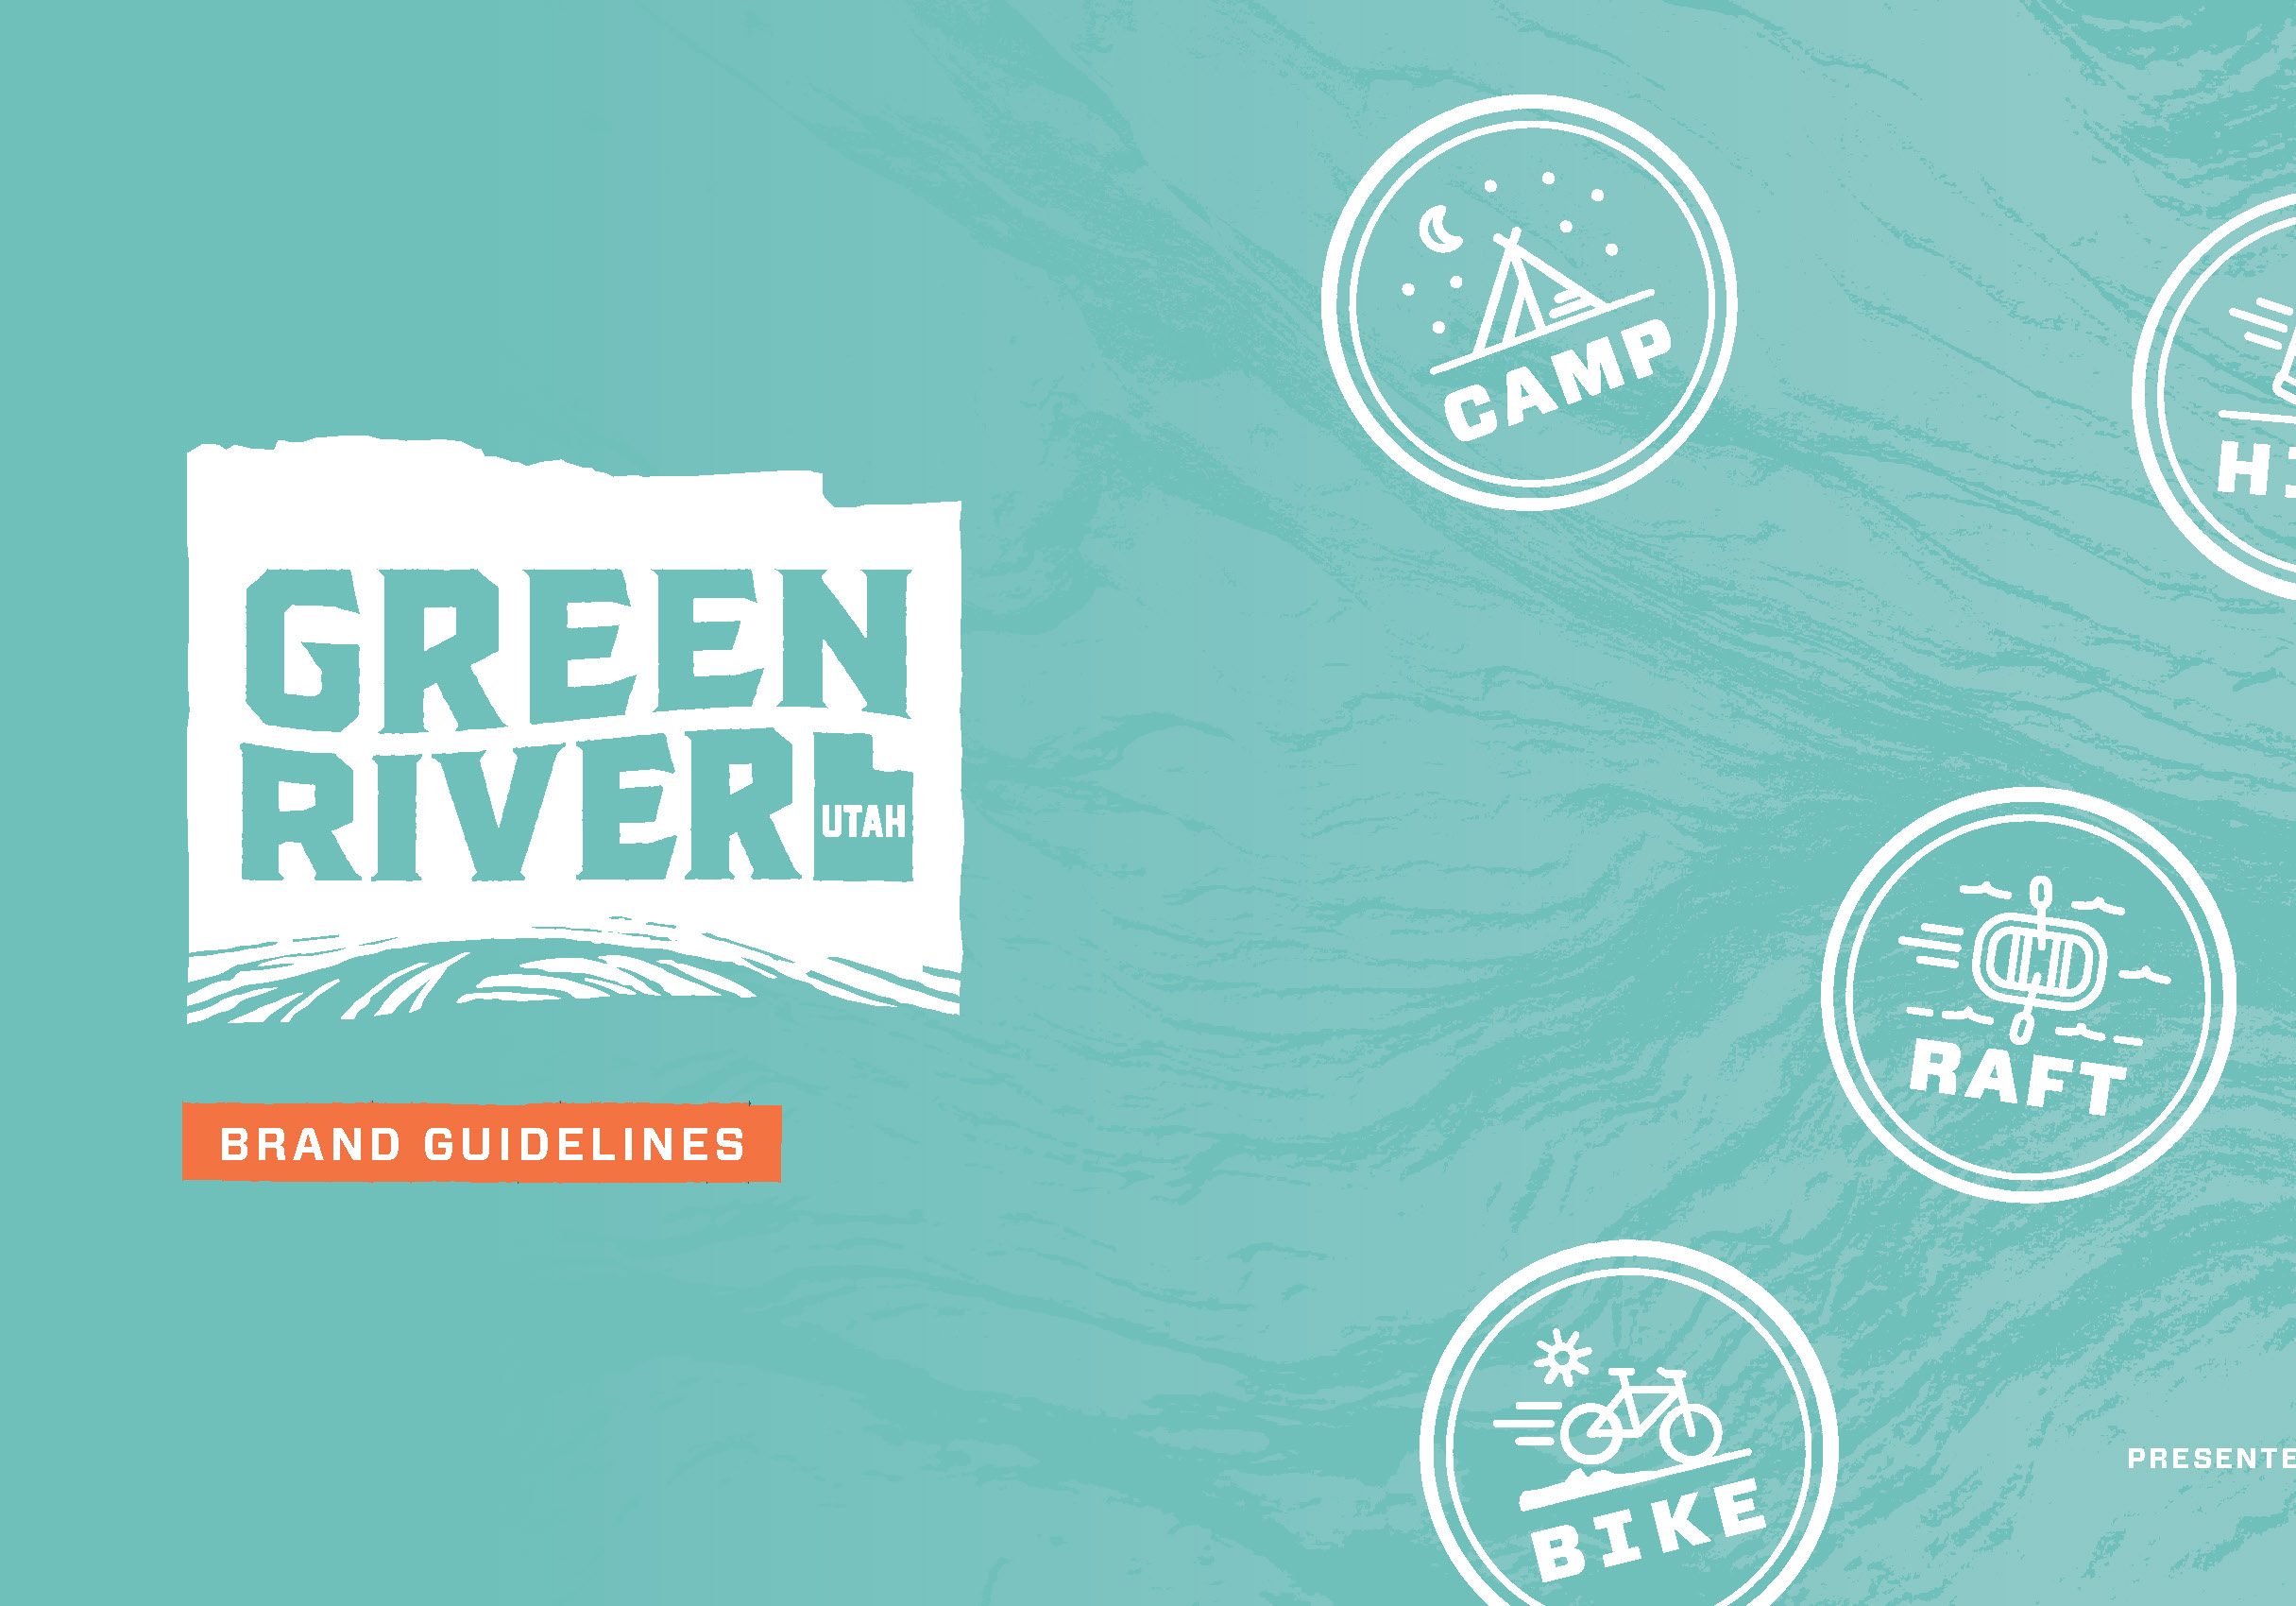 HUB worked with Green River citizens to create a new brand for the city